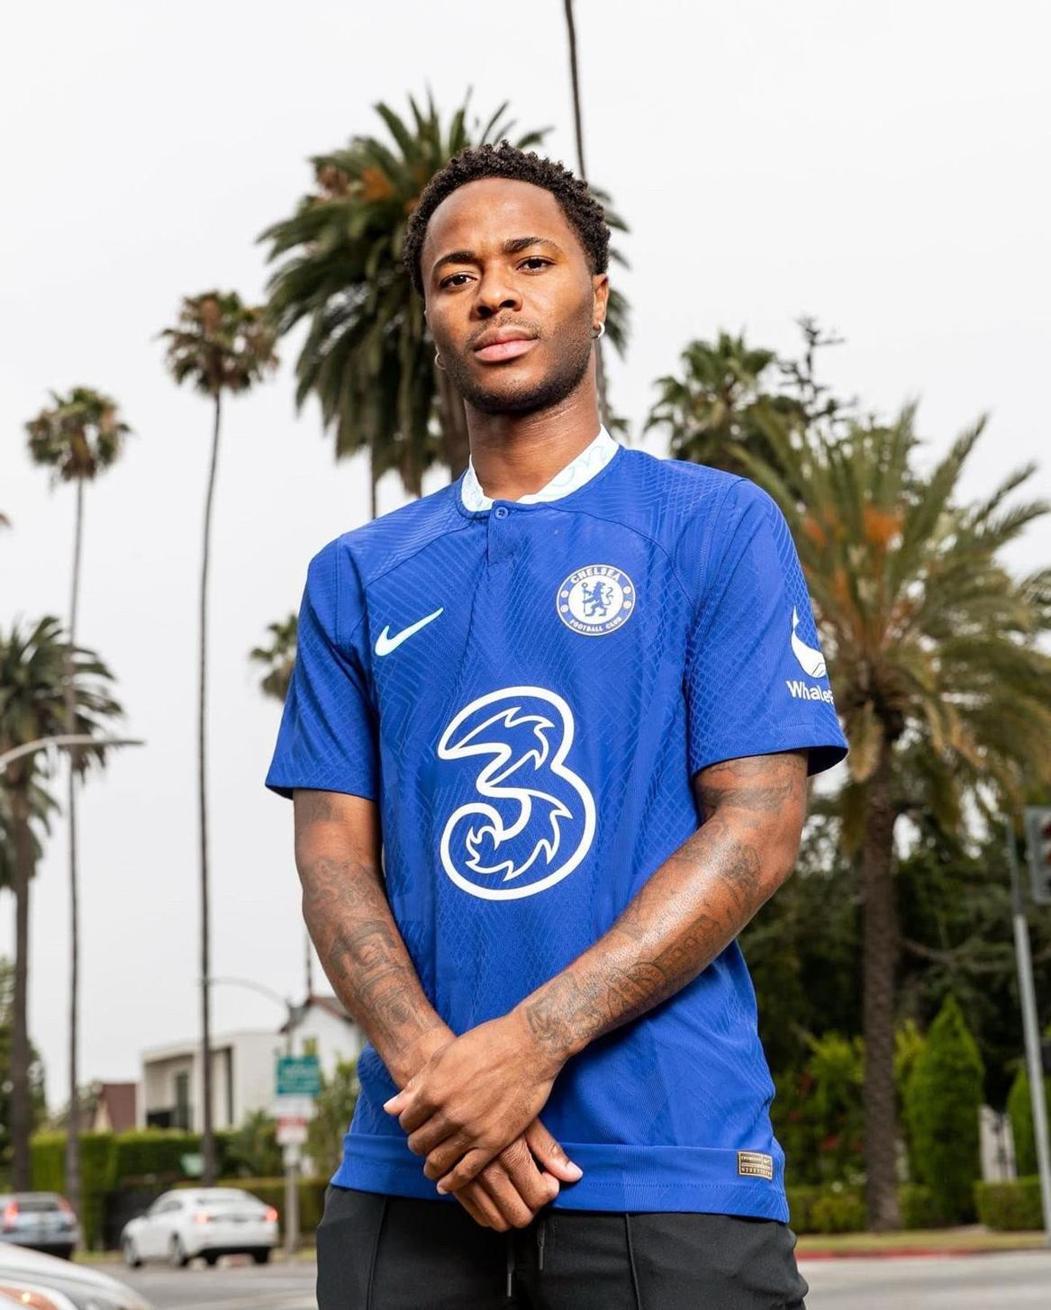 EPL: Sterling reveals Chelsea want to take Man City’s title next season